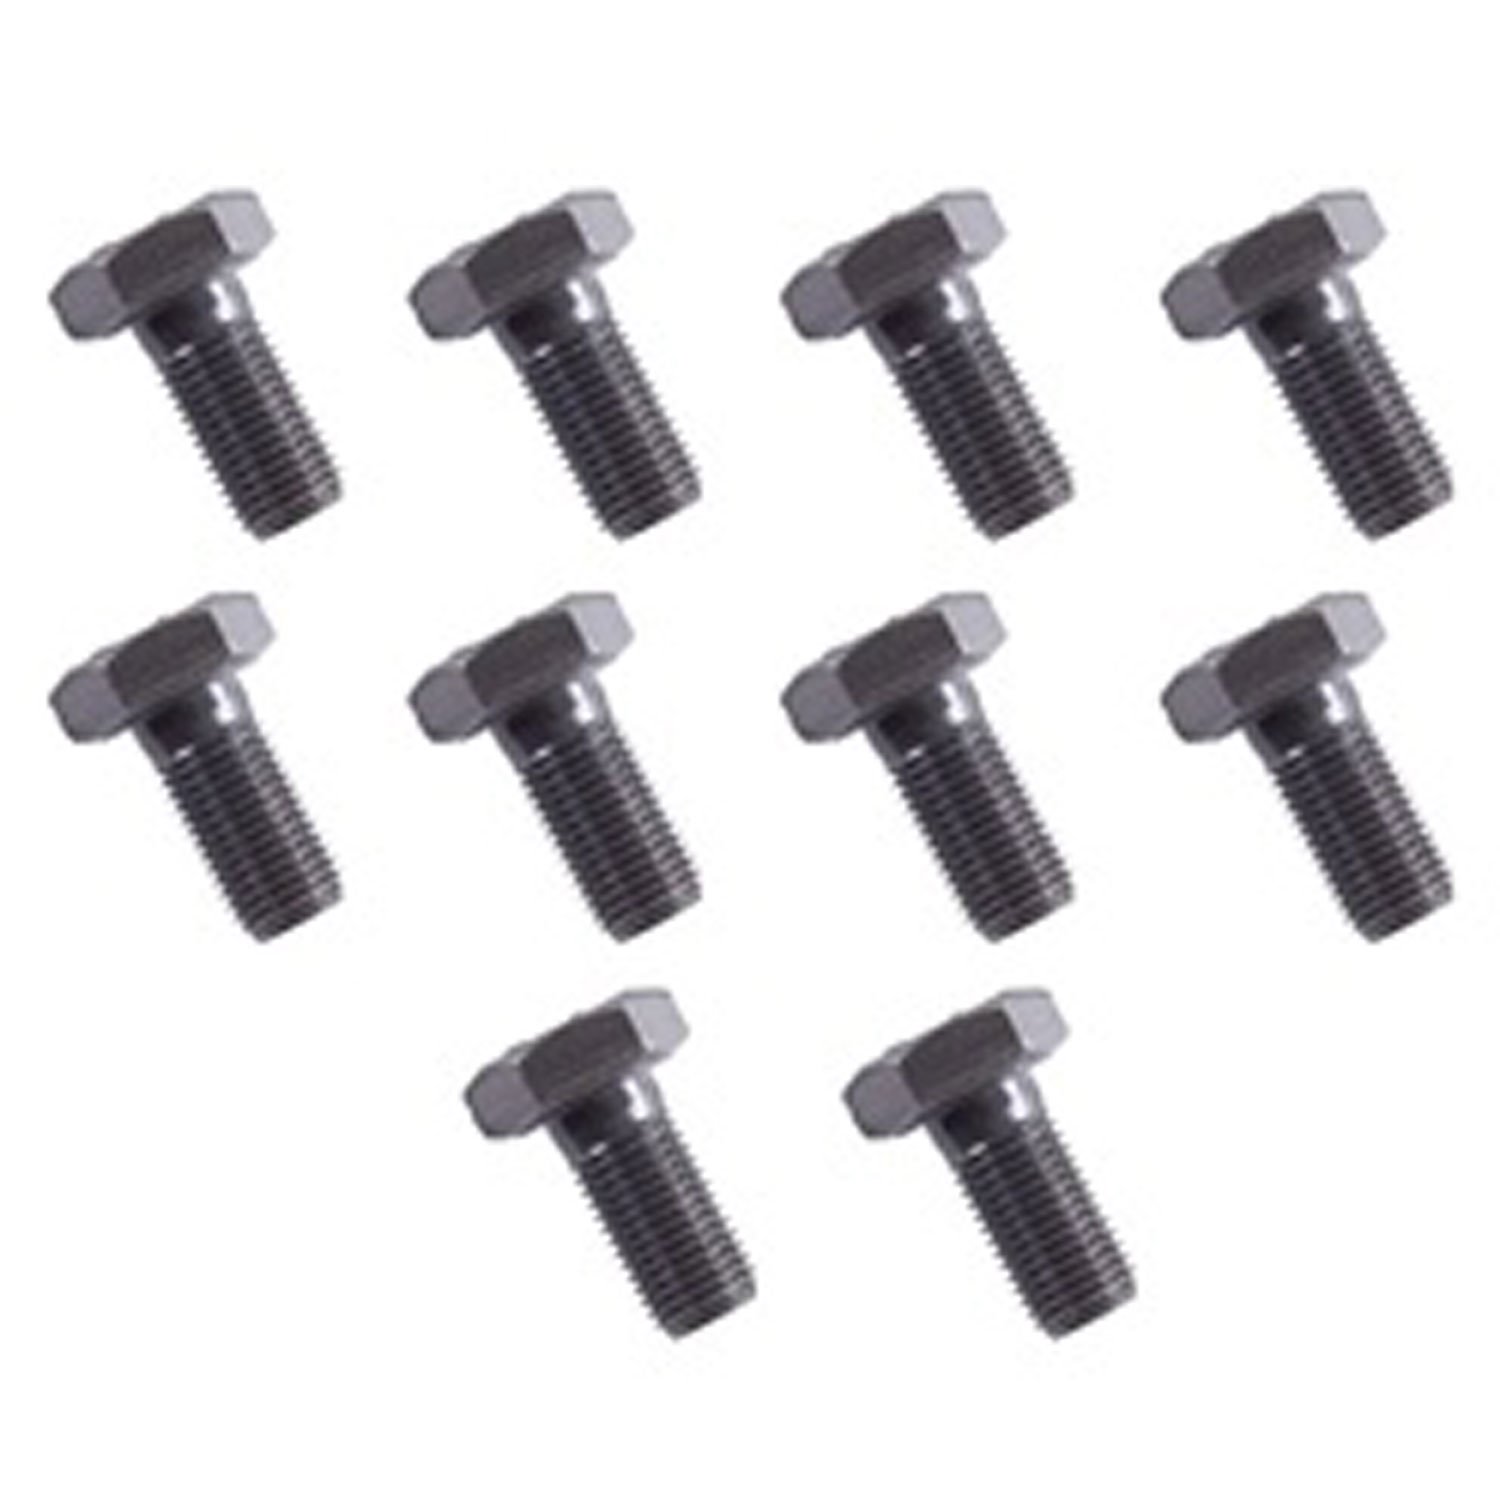 This set of 10 ring gear bolts from Omix-ADA for Dana 44 axles. 7/16 inch size.